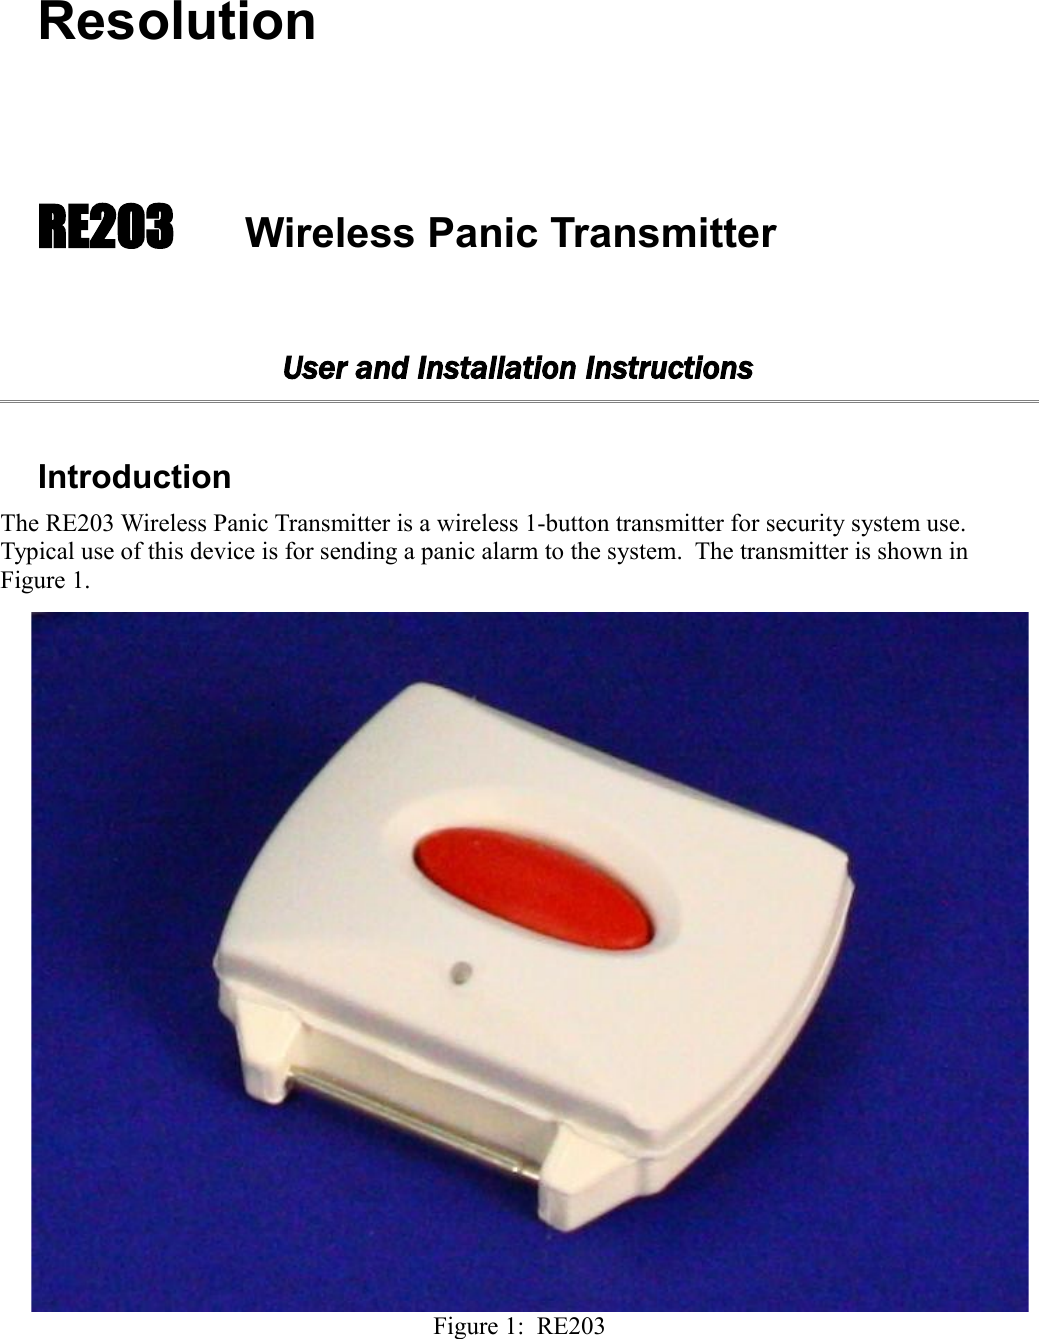 ResolutionRE203   Wireless Panic TransmitterUser and Installation InstructionsIntroductionThe RE203 Wireless Panic Transmitter is a wireless 1-button transmitter for security system use. Typical use of this device is for sending a panic alarm to the system.  The transmitter is shown in Figure 1.Figure 1:  RE203